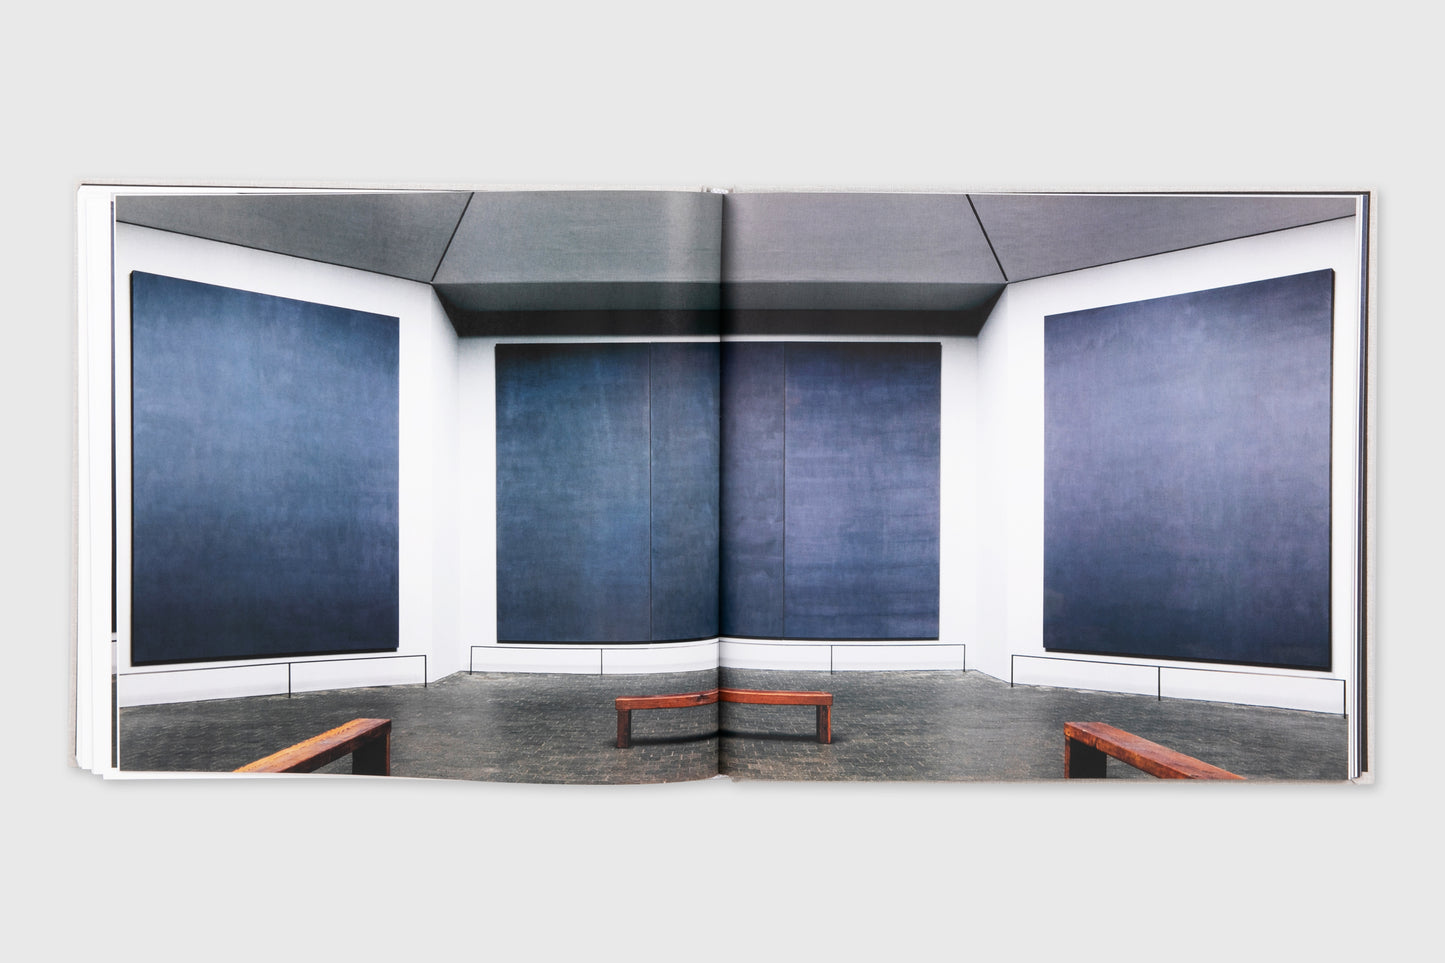 Rothko Chapel: An Oasis for Reflection